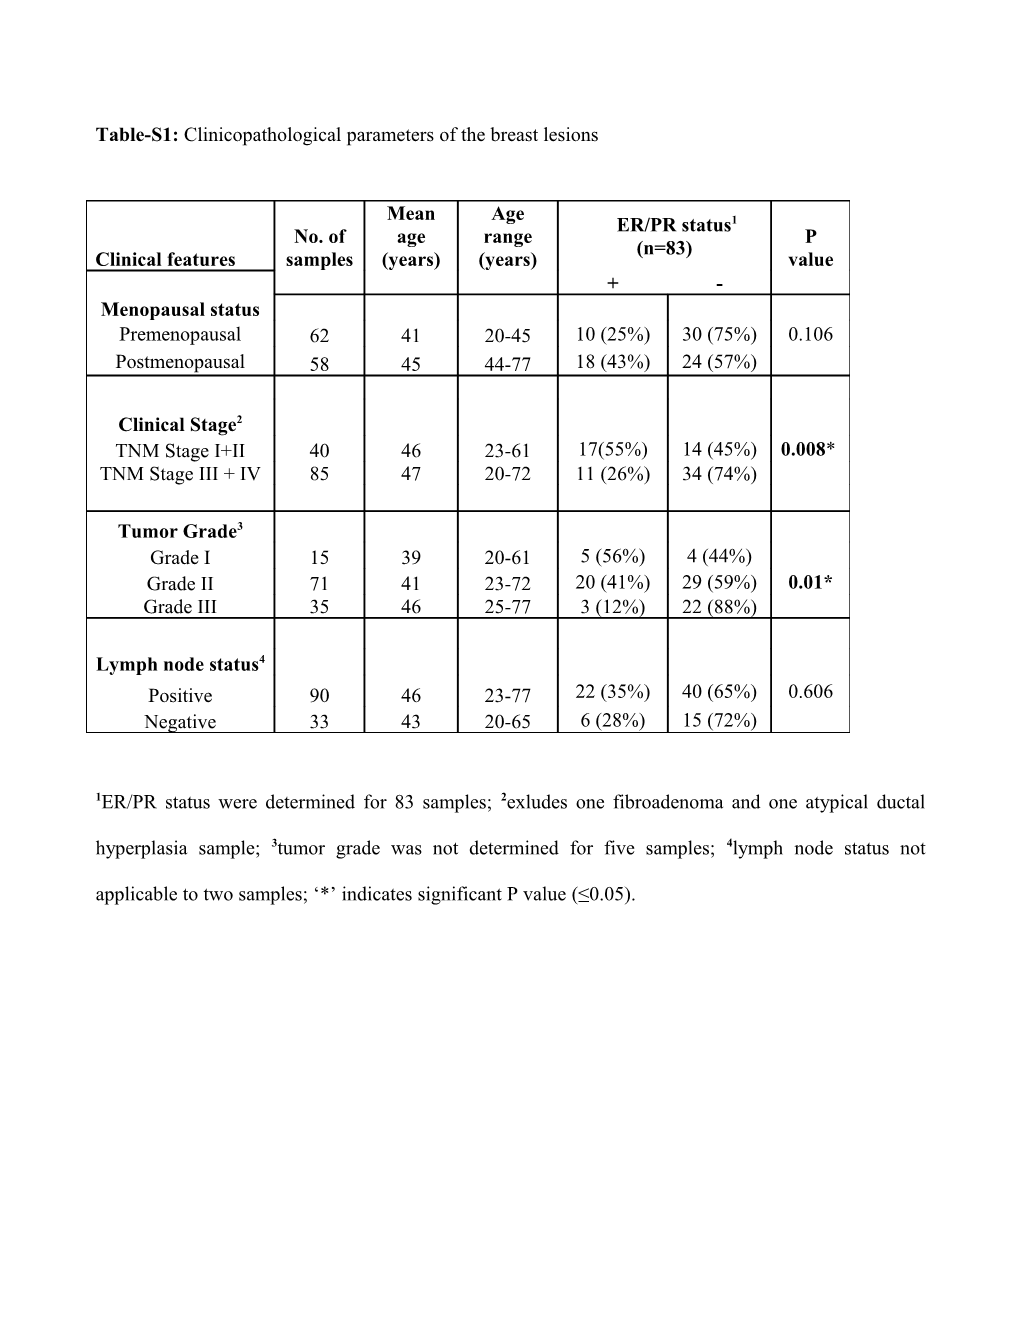 Table-S1: Clinicopathological Parameters of the Breast Lesions